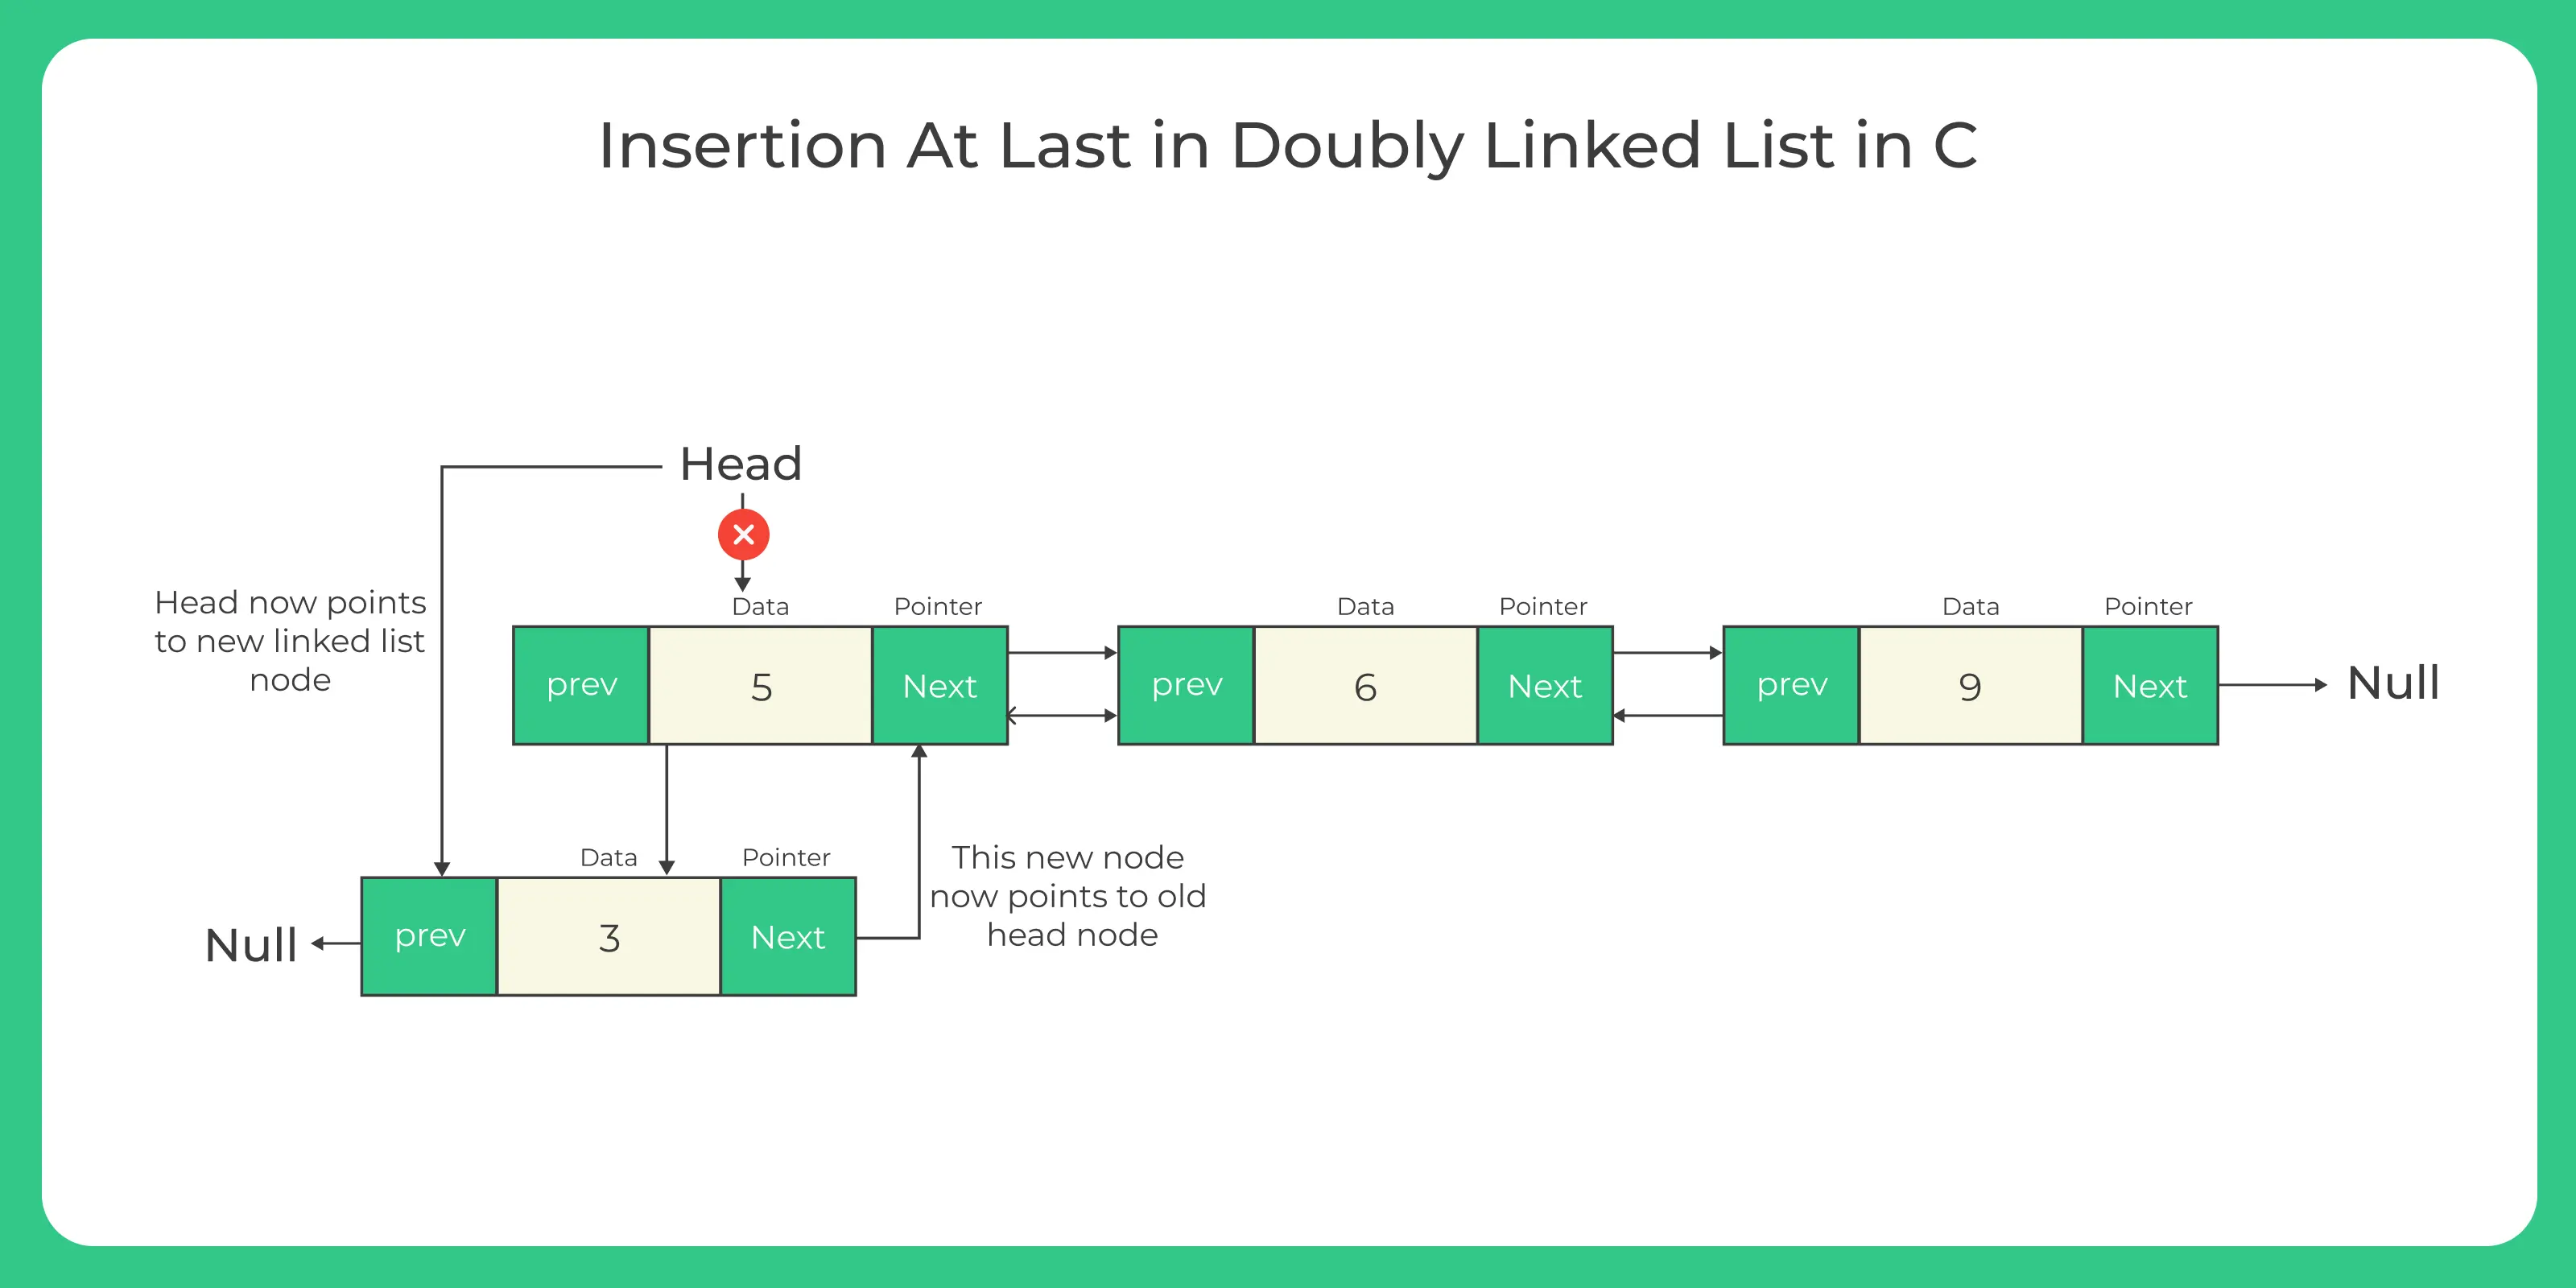 Insertion in doubly linked list in C++